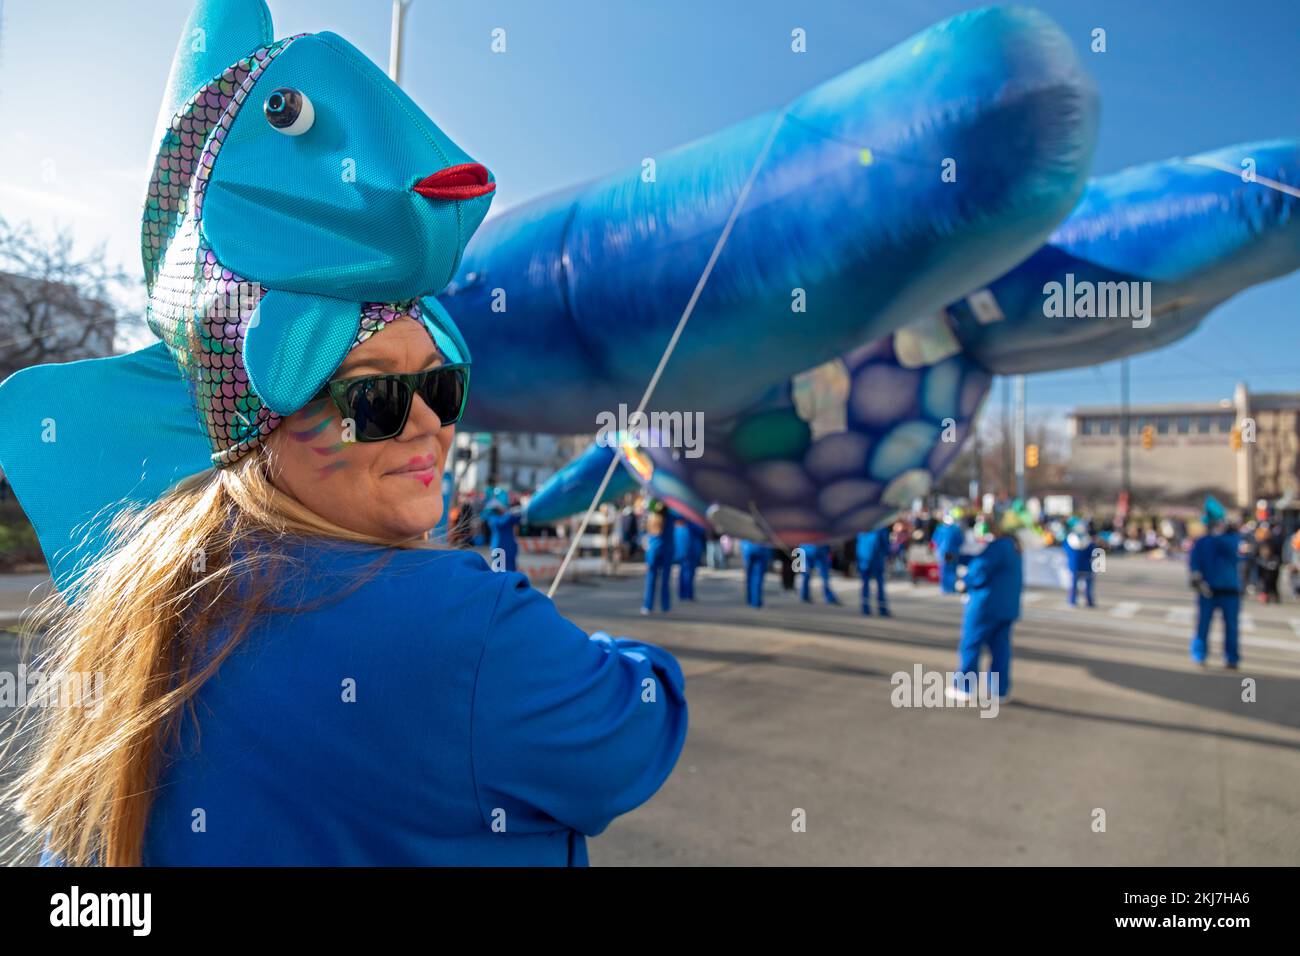 Detroit, Michigan, USA. 24th Nov, 2022. A balloon handler in a fish costume at Detroit's Thanksgiving Day parade, officially America's Thanksgiving Parade. Credit: Jim West/Alamy Live News Stock Photo